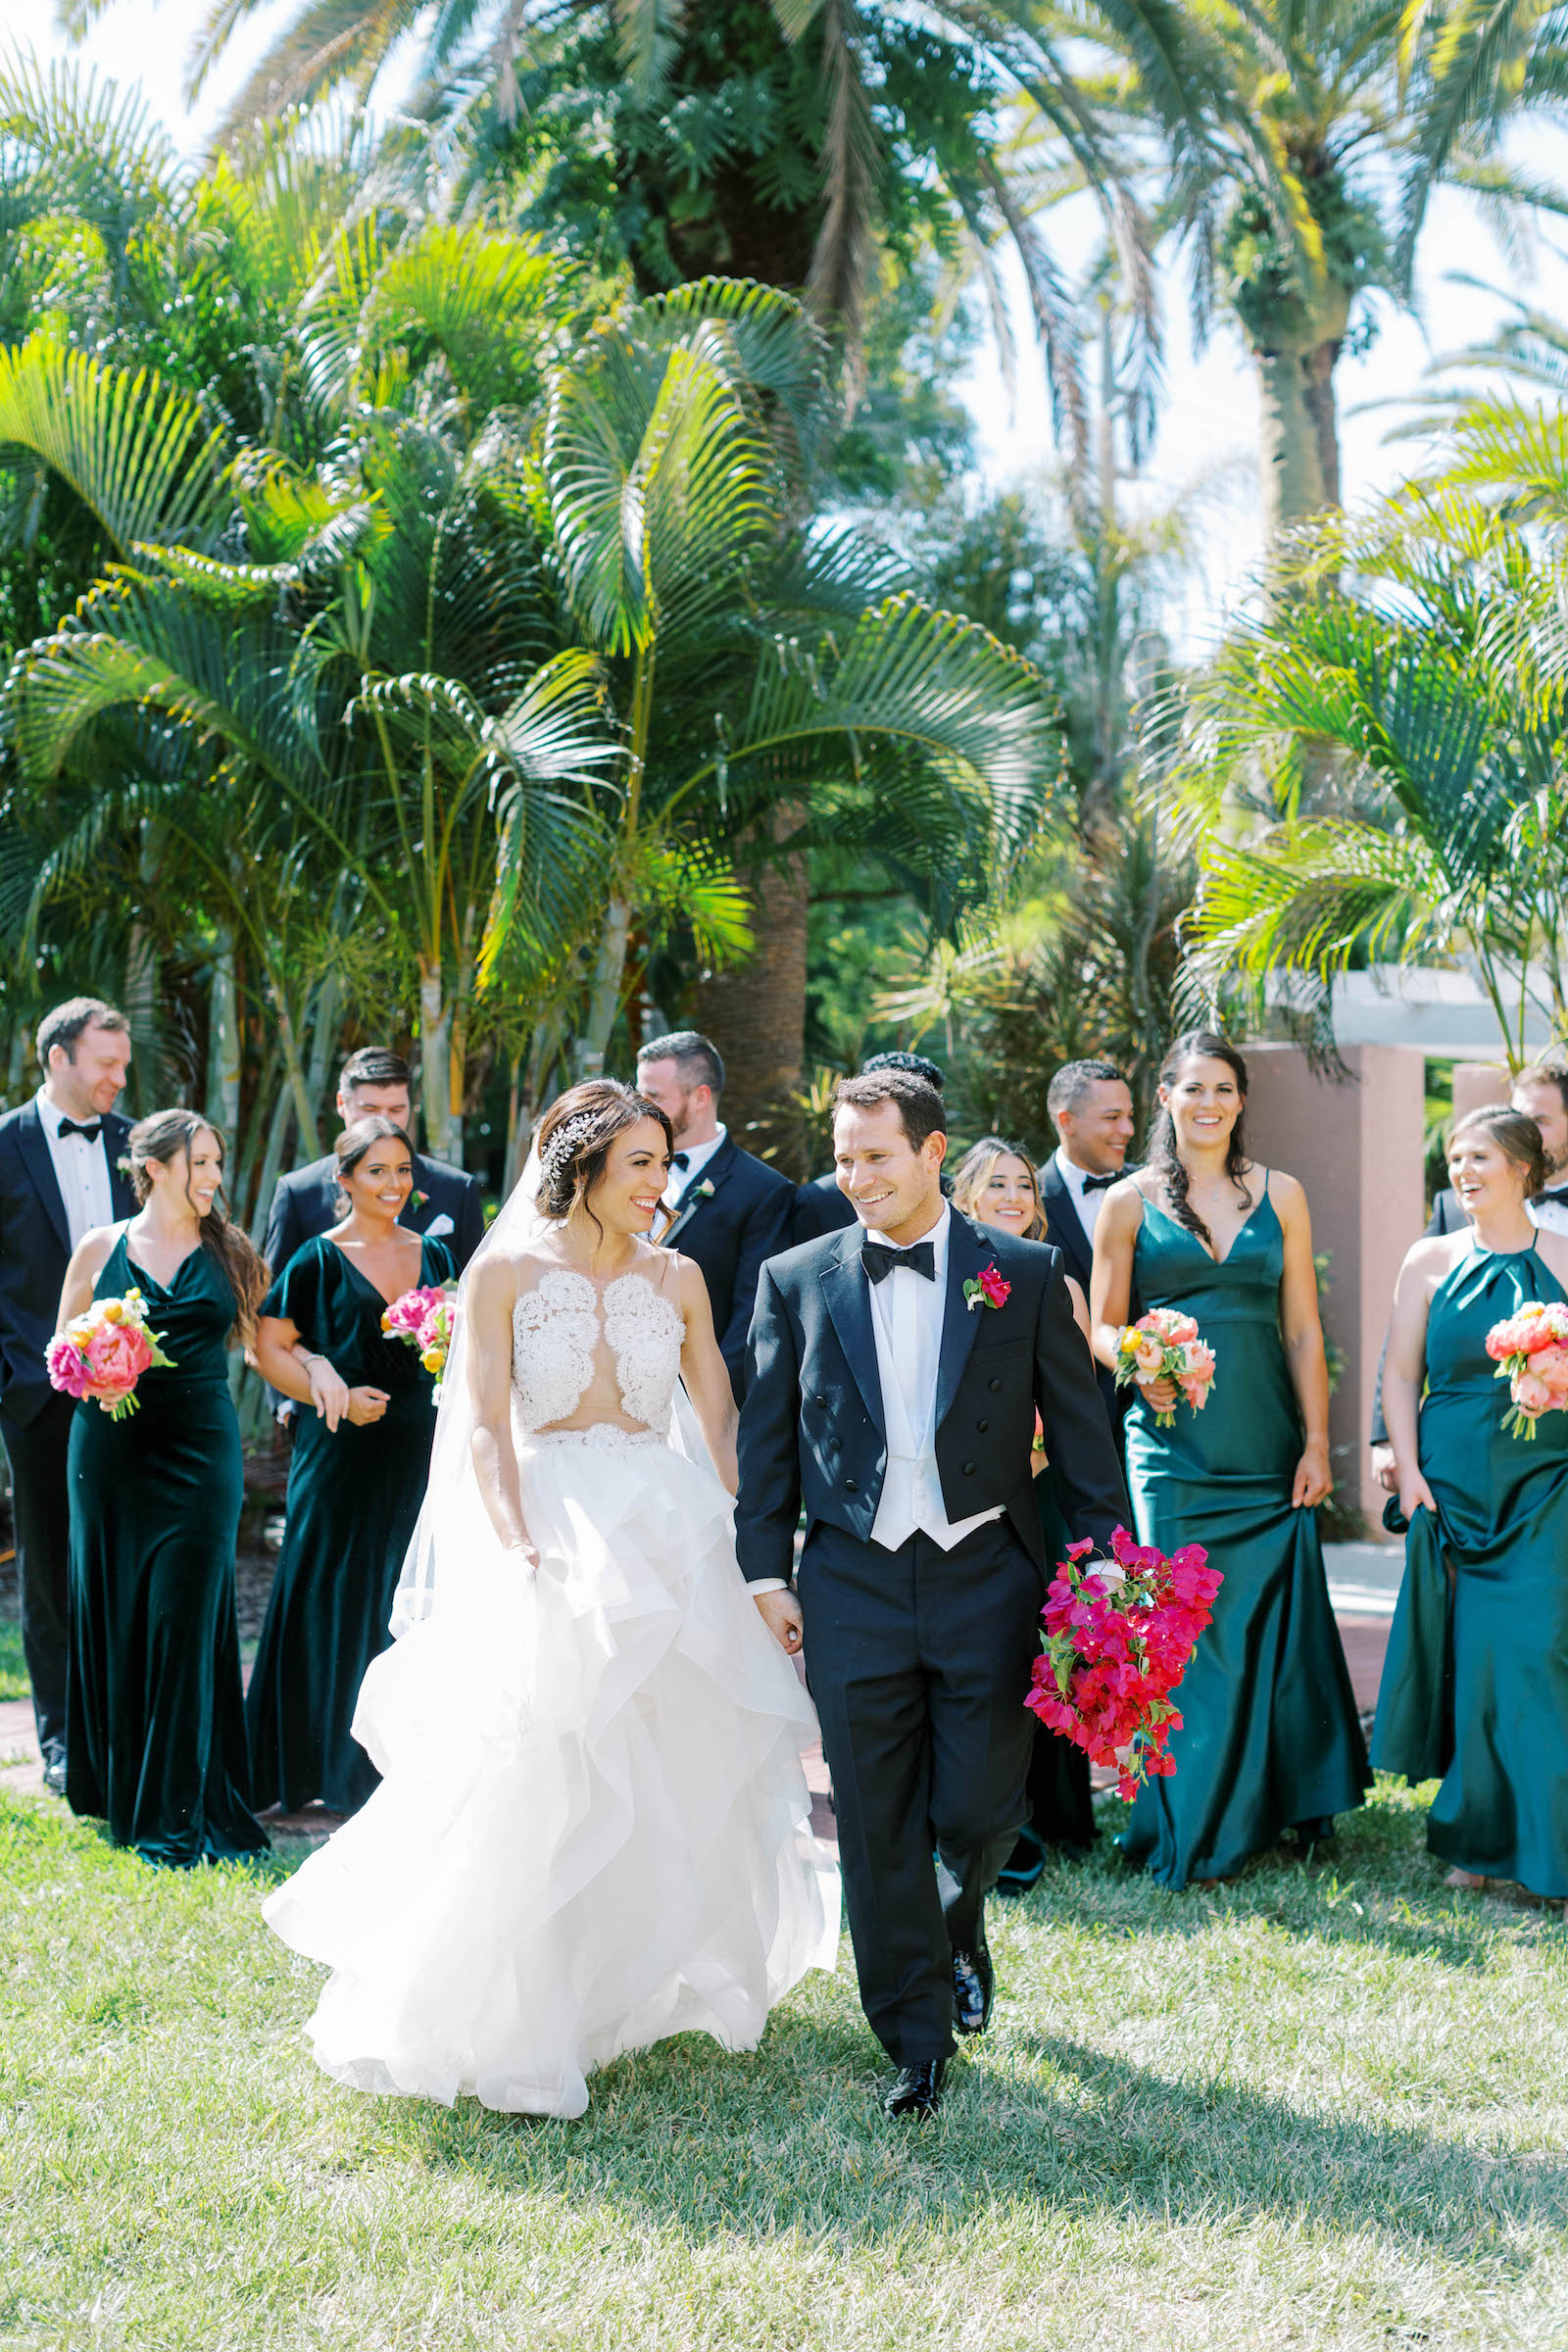 Bride and Groom with Green Bridesmaids Dresses and Groomsmen in Tuxedos Bridal Party Wedding Portrait